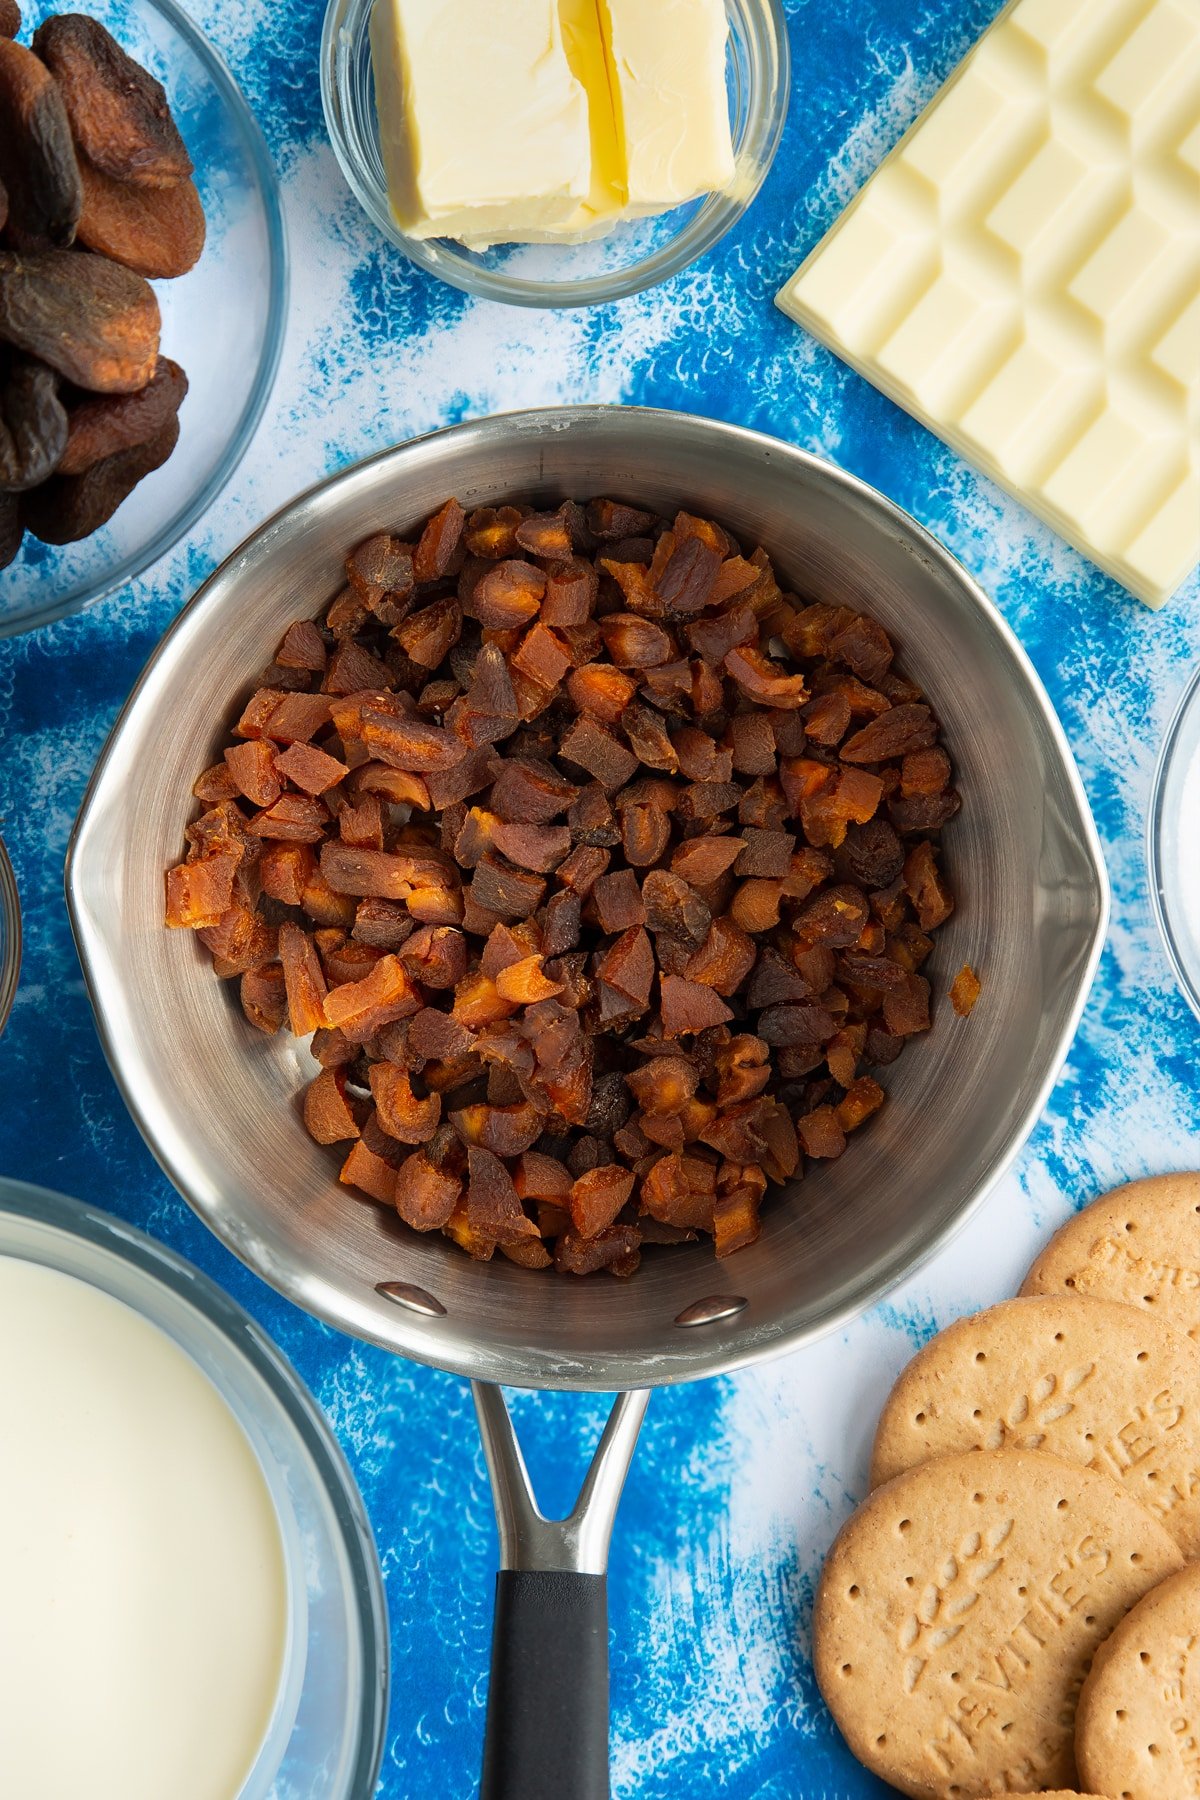 Chopped dried apricots in a pan. Ingredients to make an apricot cheesecake surround the pan.